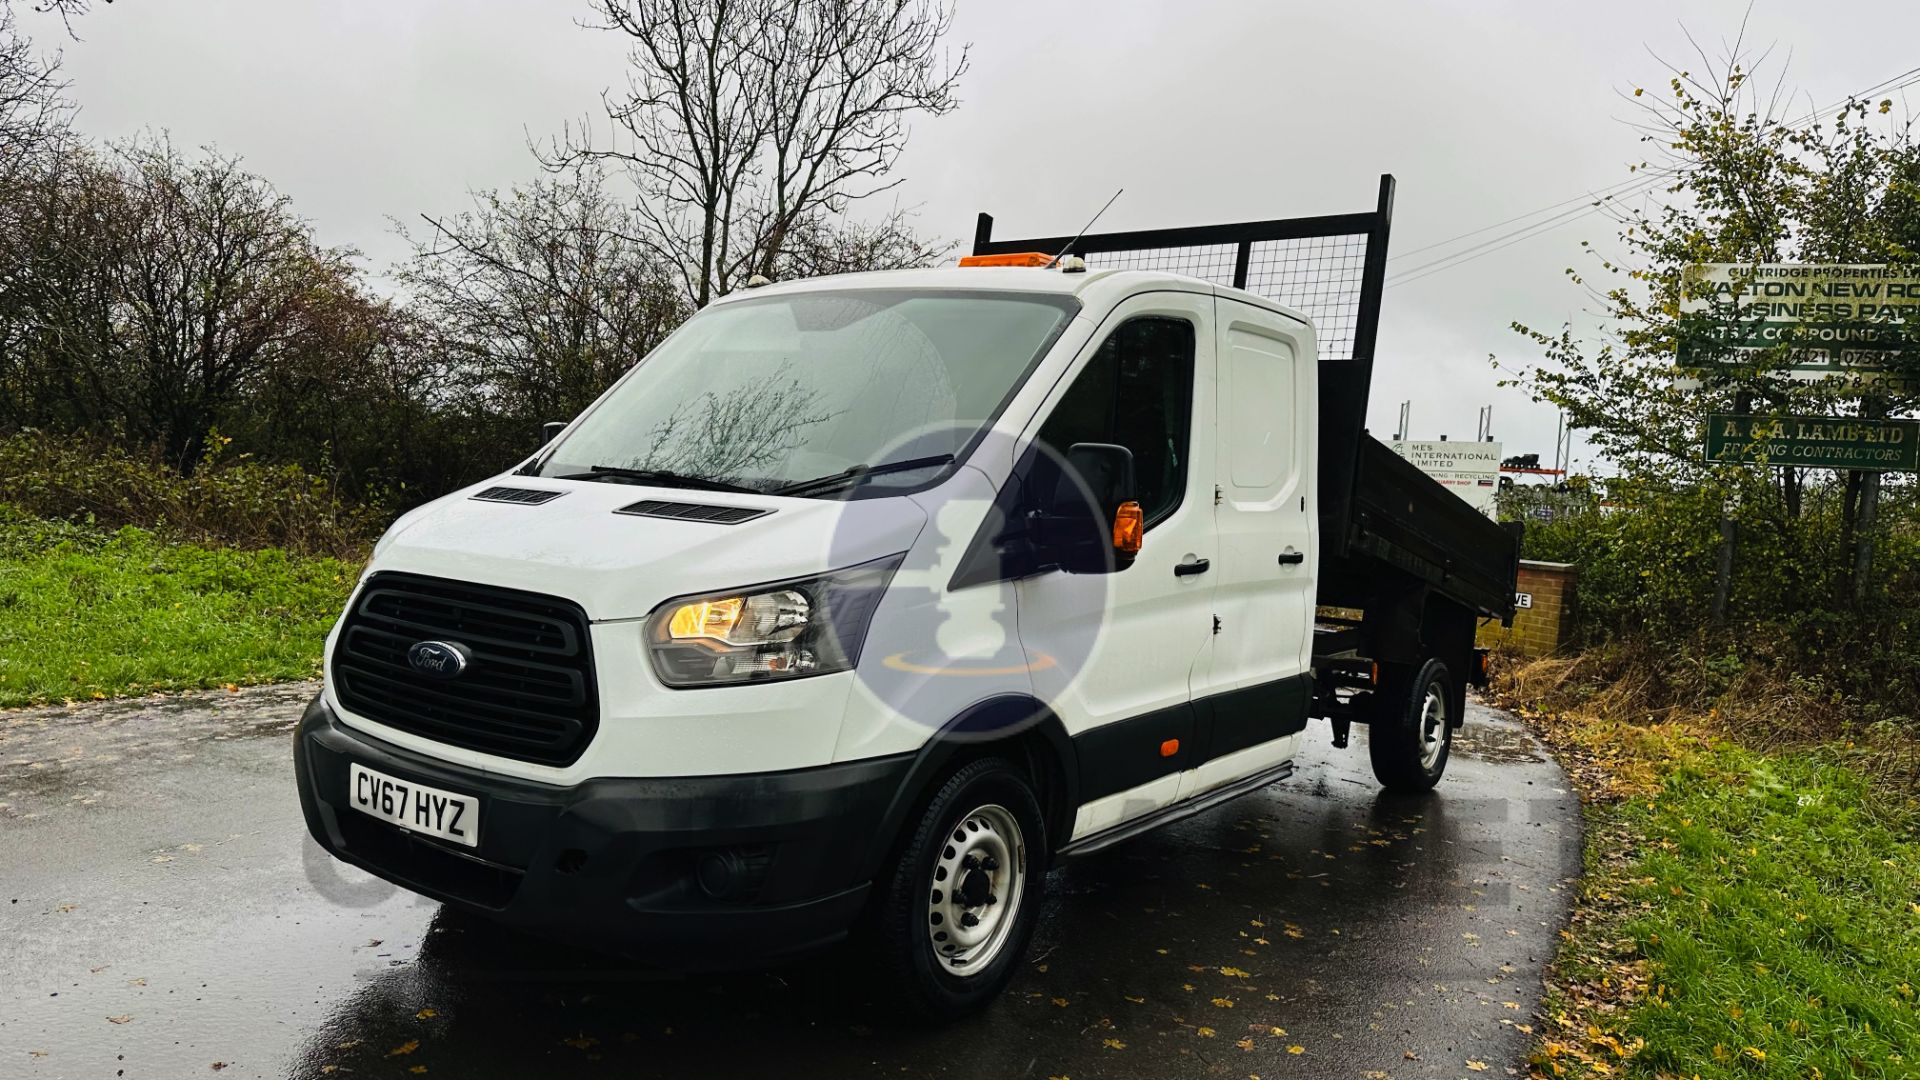 (ON SALE) FORD TRANSIT 130 T350 *LWB - UTILITY CAB TIPPER TRUCK* (2018 - EURO 6) 2.0 TDCI (3500 KG) - Image 5 of 34